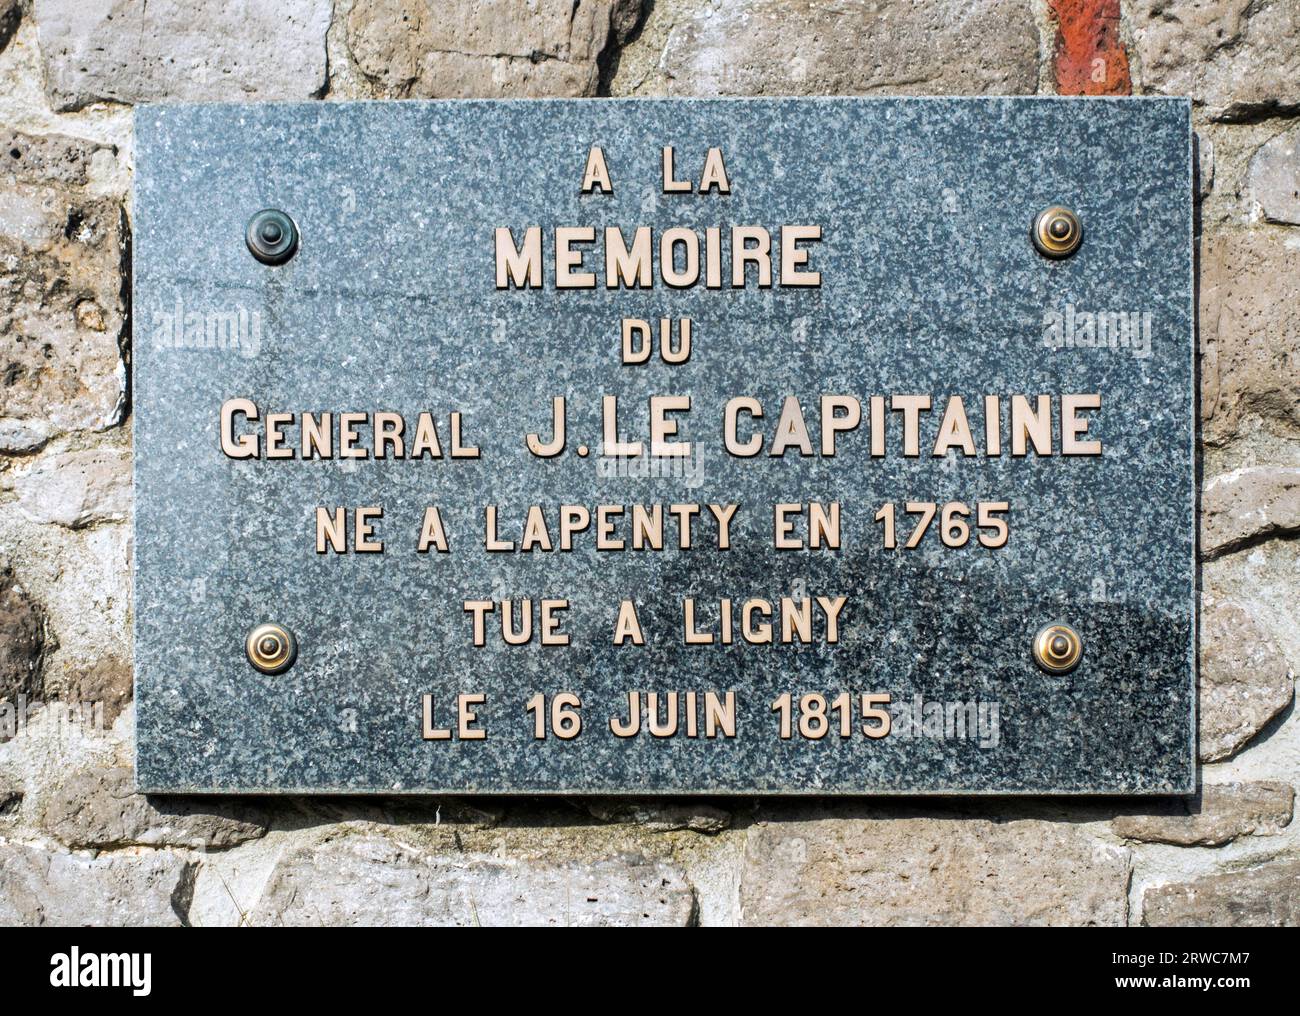 Commemorative plaque for general Jacques Lecapitaine, killed during the 1815 Battle of Ligny, Sombreffe, Namur, Wallonia, Belgium Stock Photo